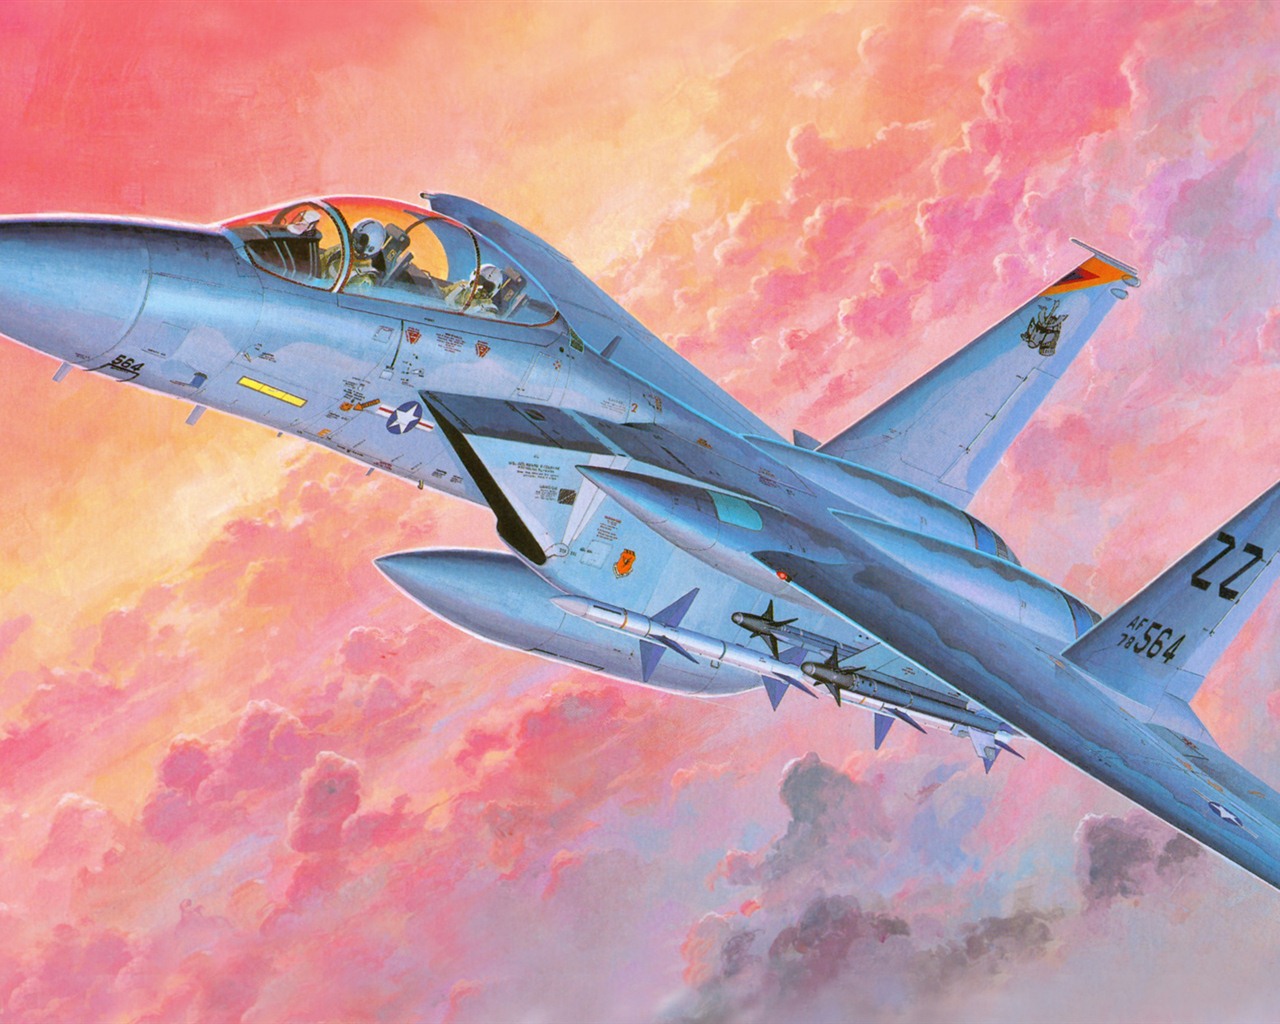 Military aircraft flight exquisite painting wallpapers #15 - 1280x1024